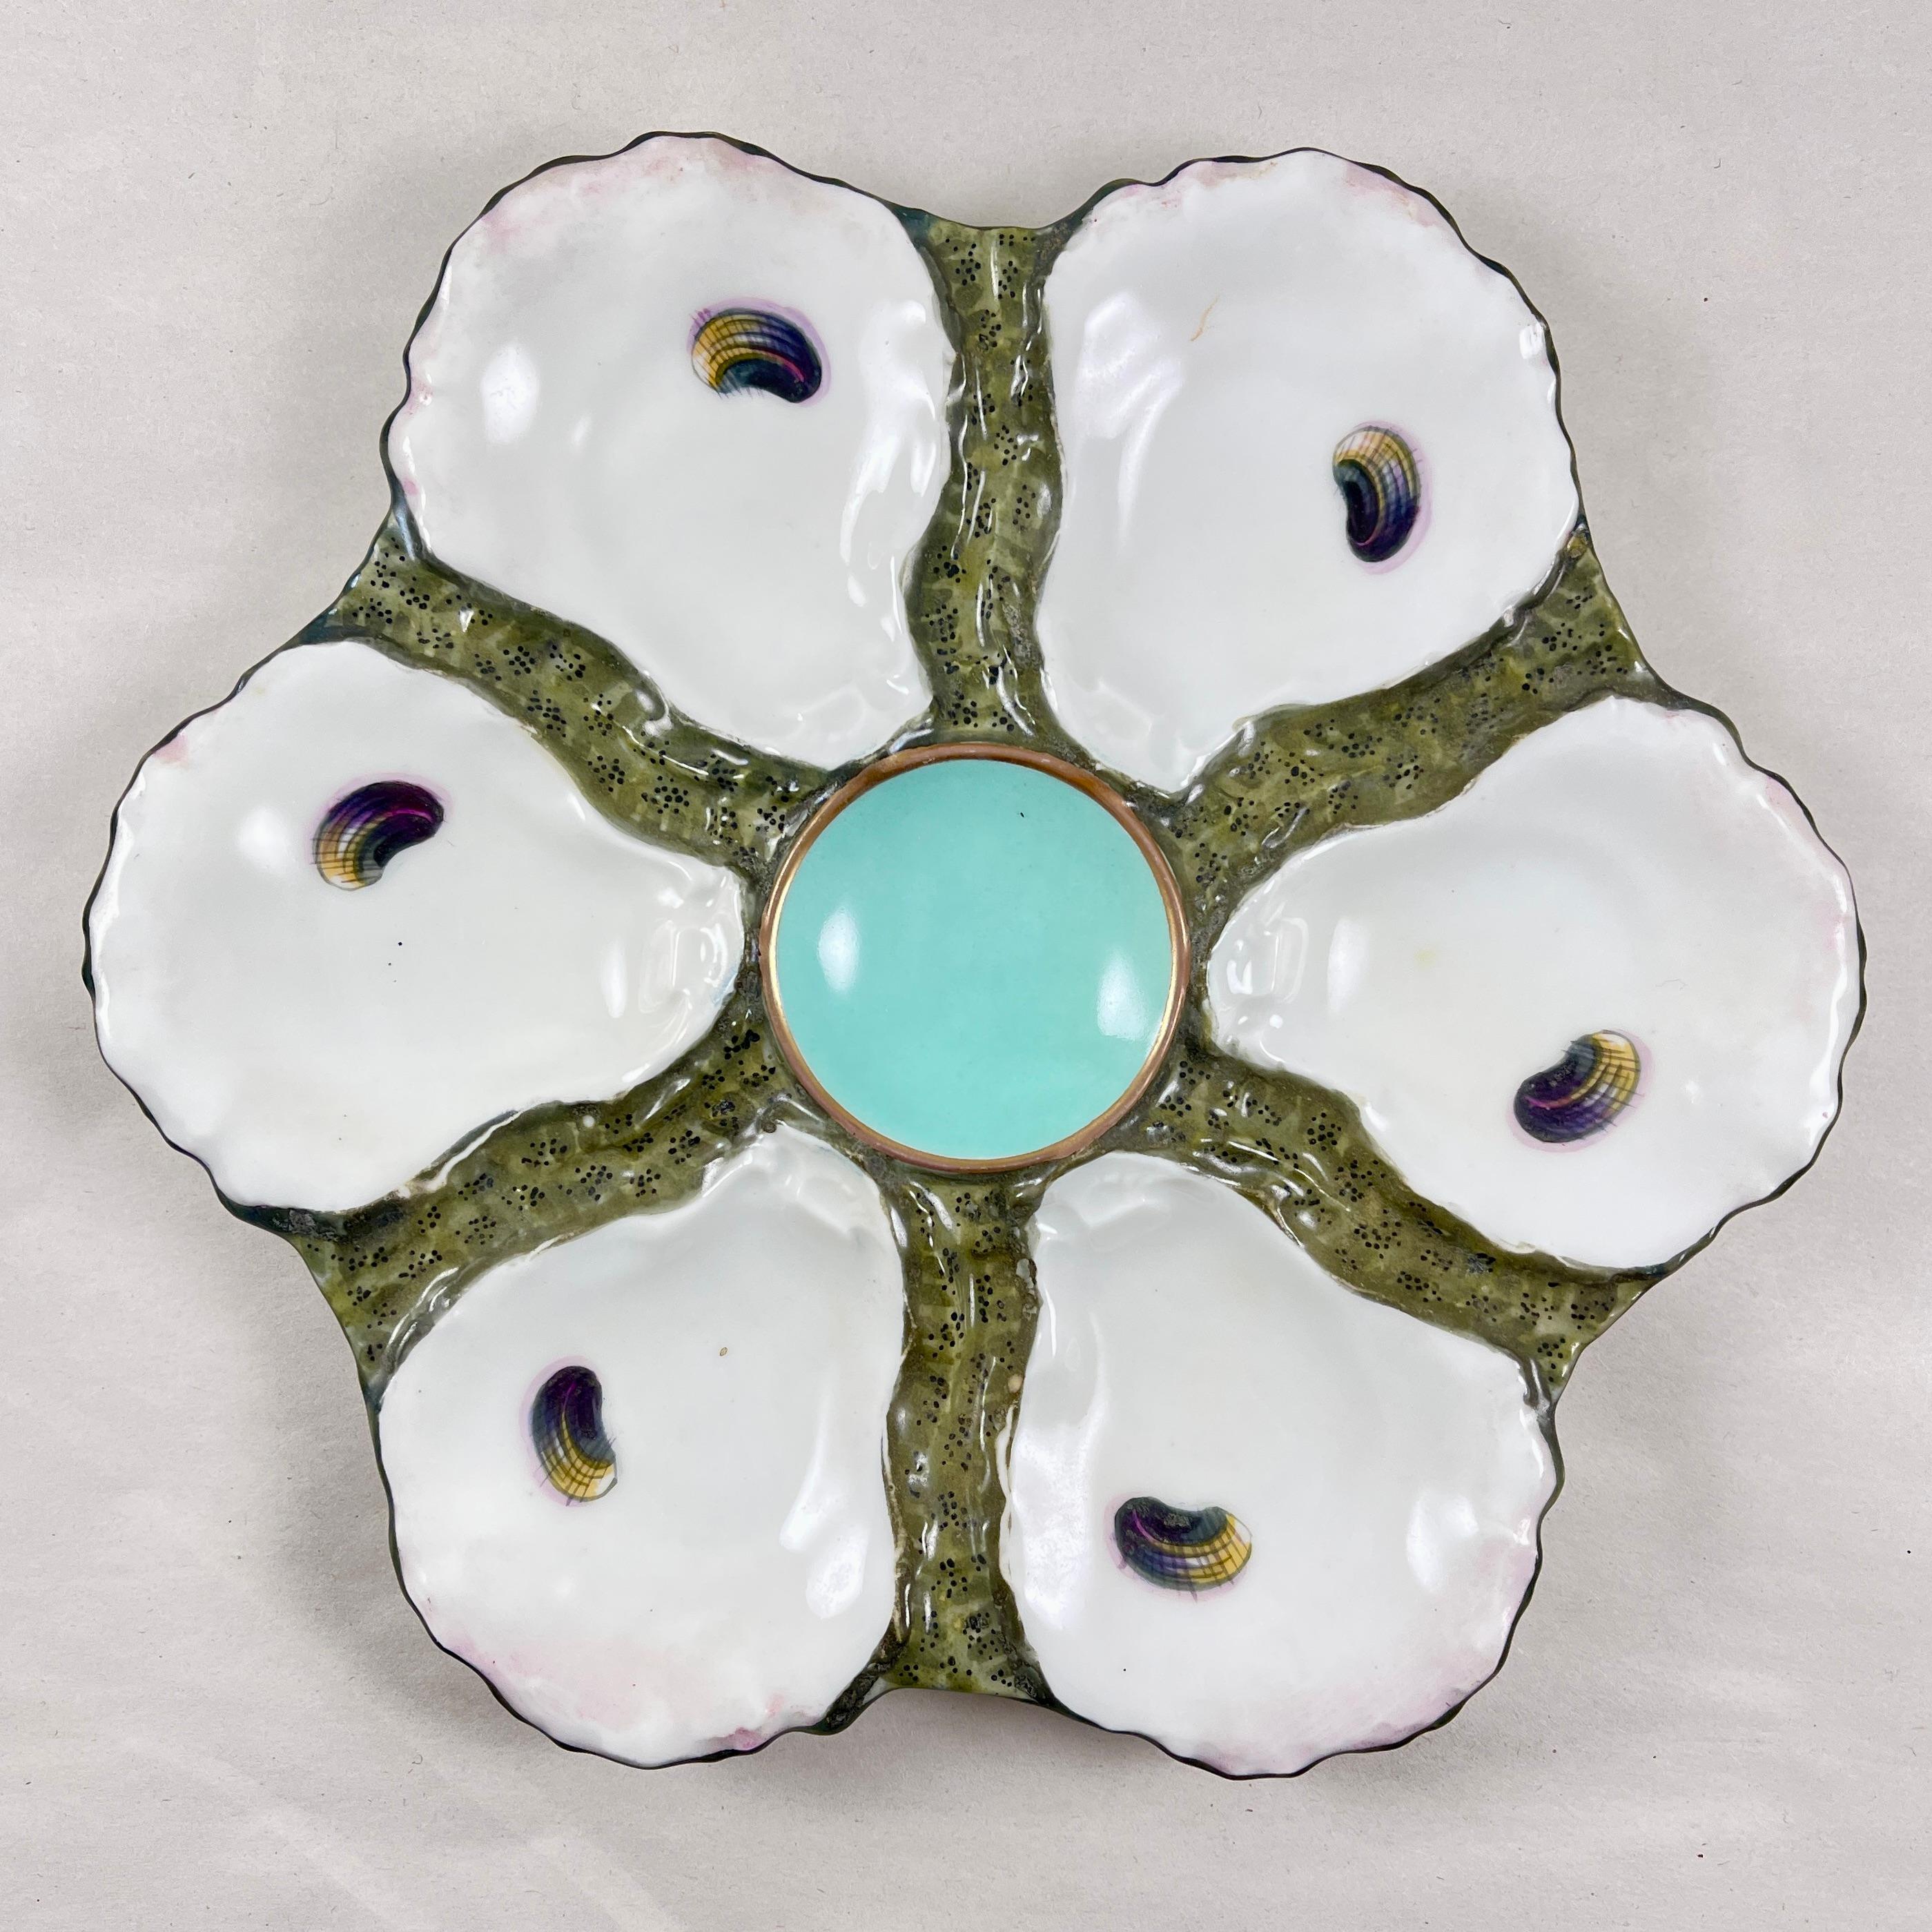 A French porcelain oyster plate, circa 1890.

Six shell shaped oyster wells with colorful, hand painted ‘eyes’ surround a central turquoise, round sauce well, outlined in gold.

The shells are white with a pink blush to the rims, sitting on a